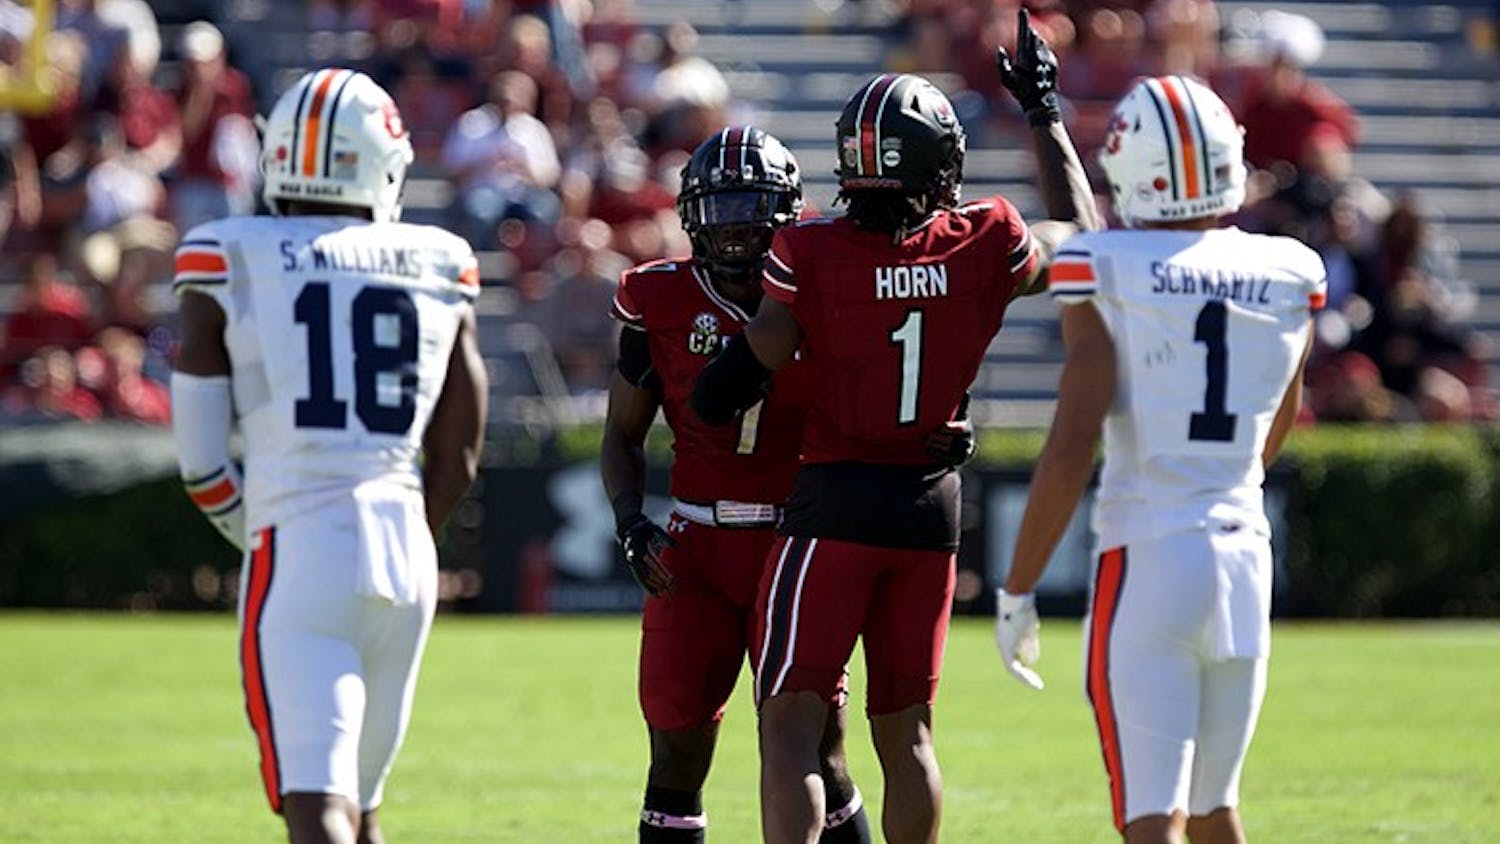 Cornerback Jaycee Horn celebrates his tackle during the third quarter of the game on Saturday, Oct. 17. South Carolina upset Auburn 30-22 at home.